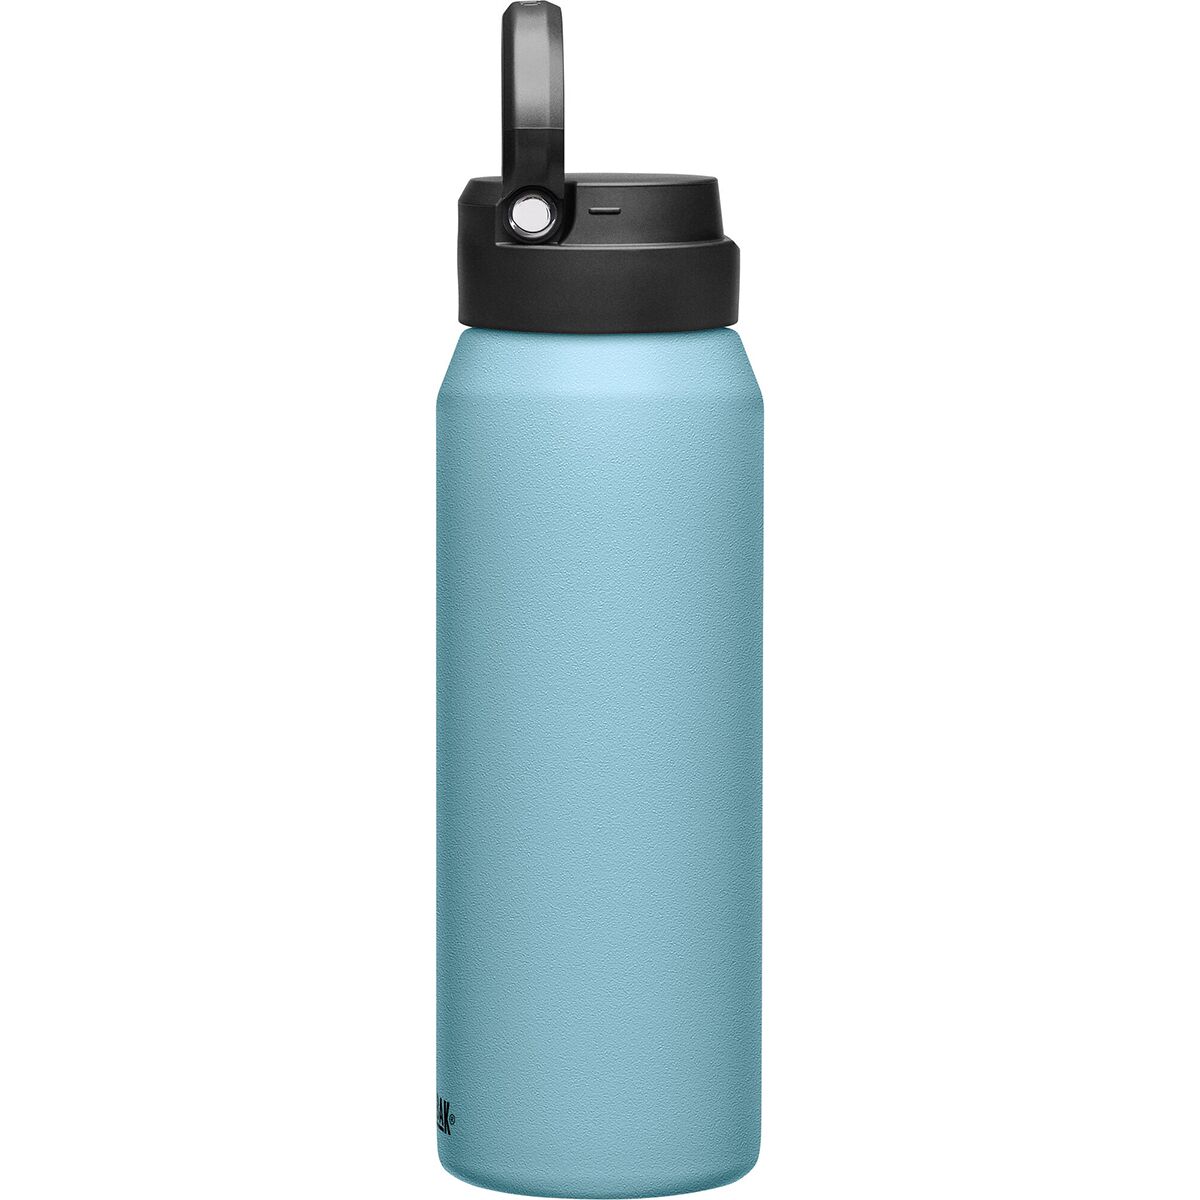 CamelBak Fit Cap 32oz Vacuum Insulated Stainless Steel Bottle - Hike & Camp